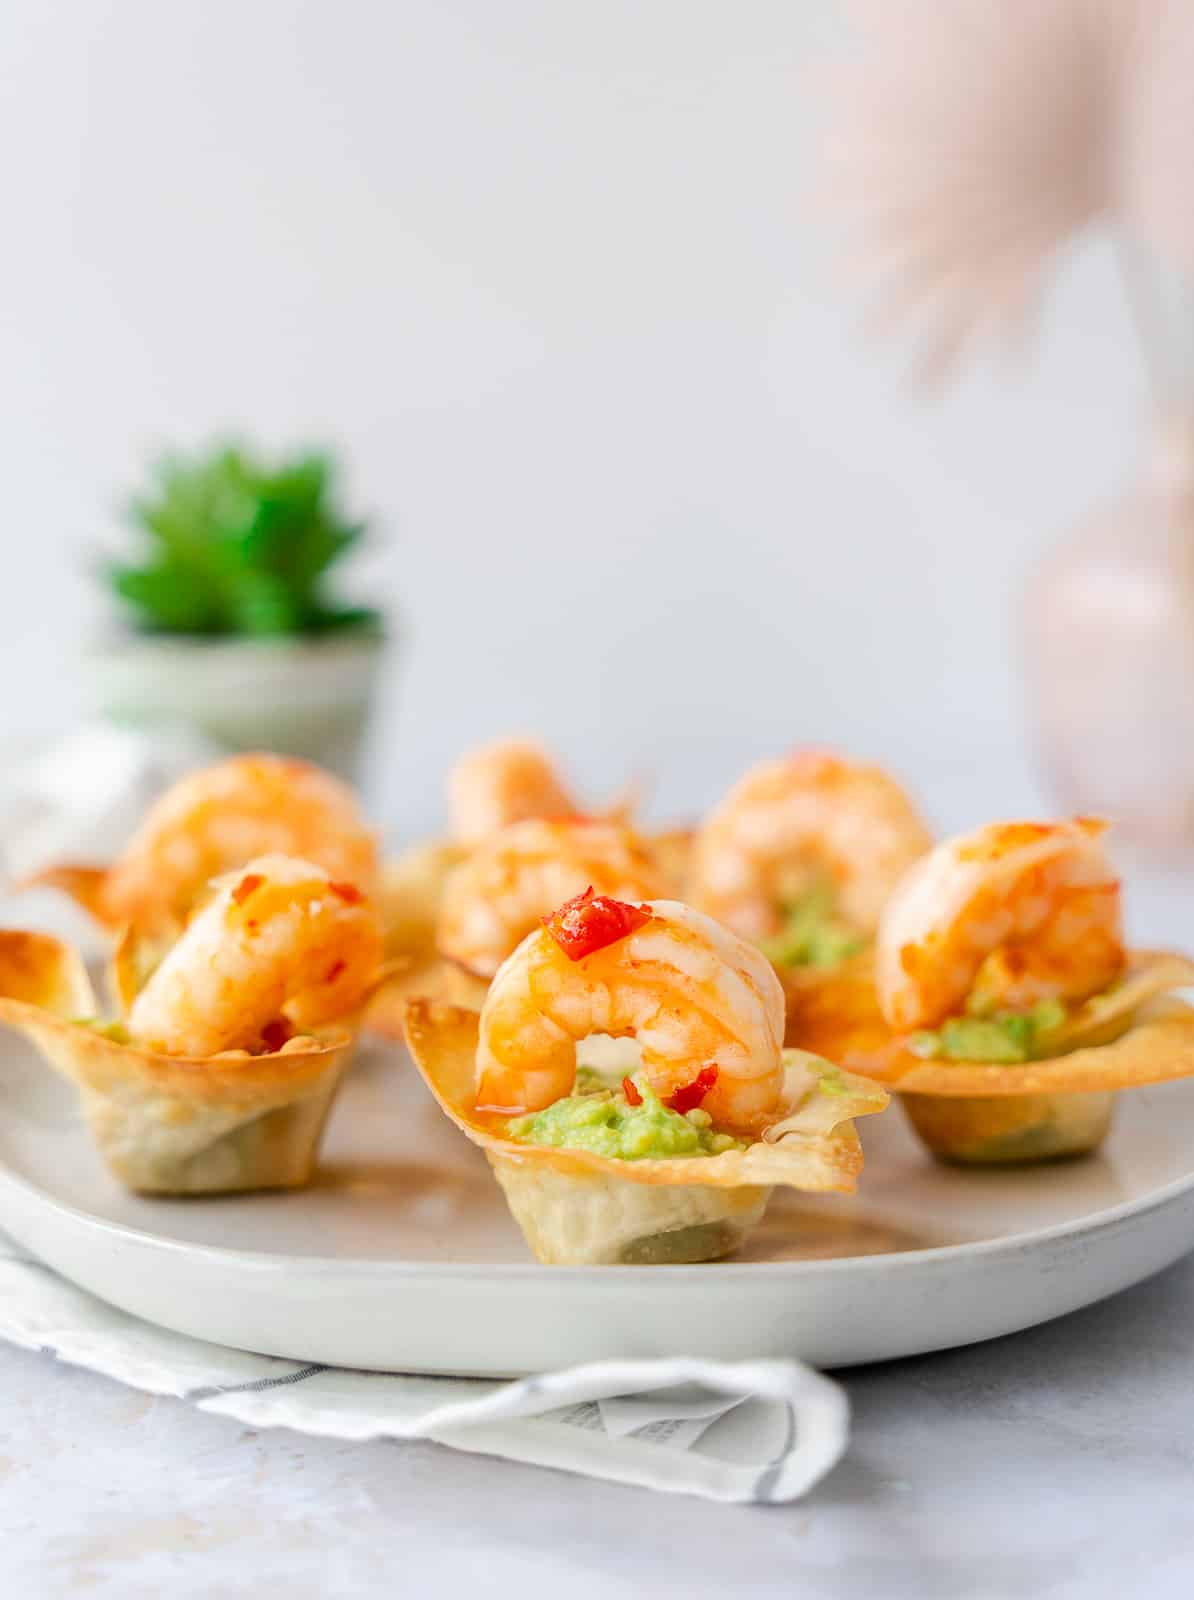 Shrimp and guacamole wonton cups on a plate.